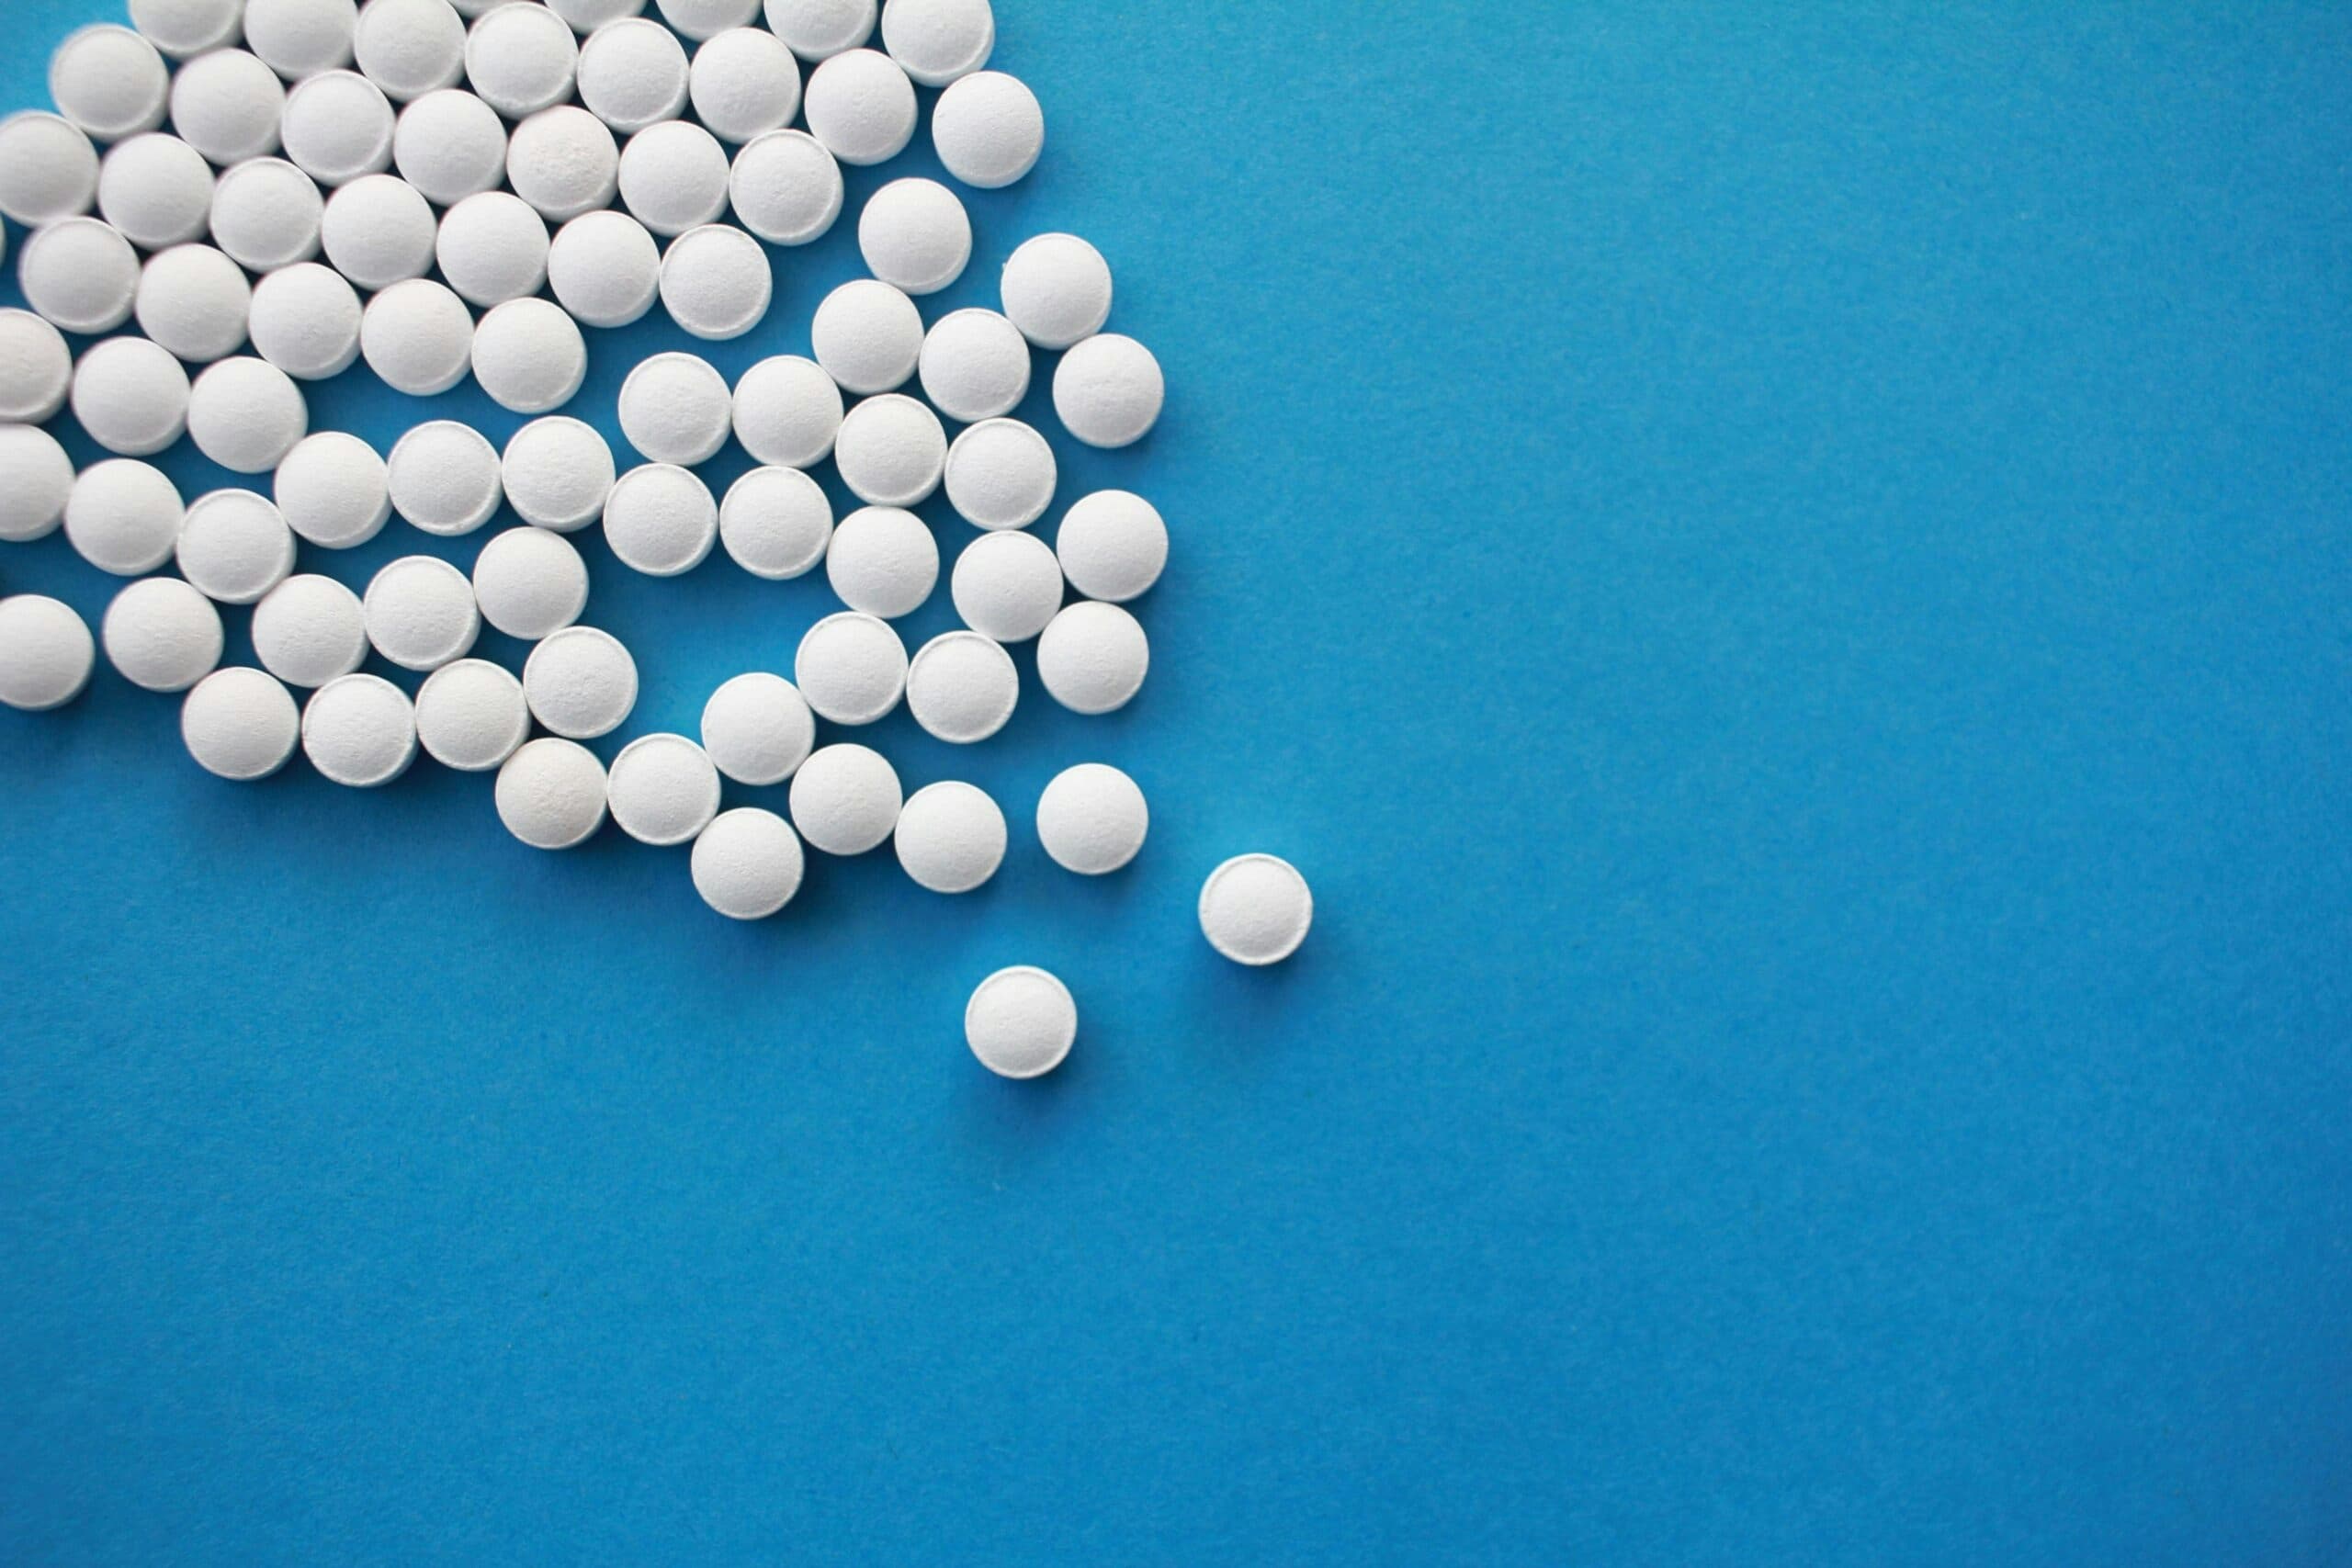 Chewable or regular aspirin: what is the difference?